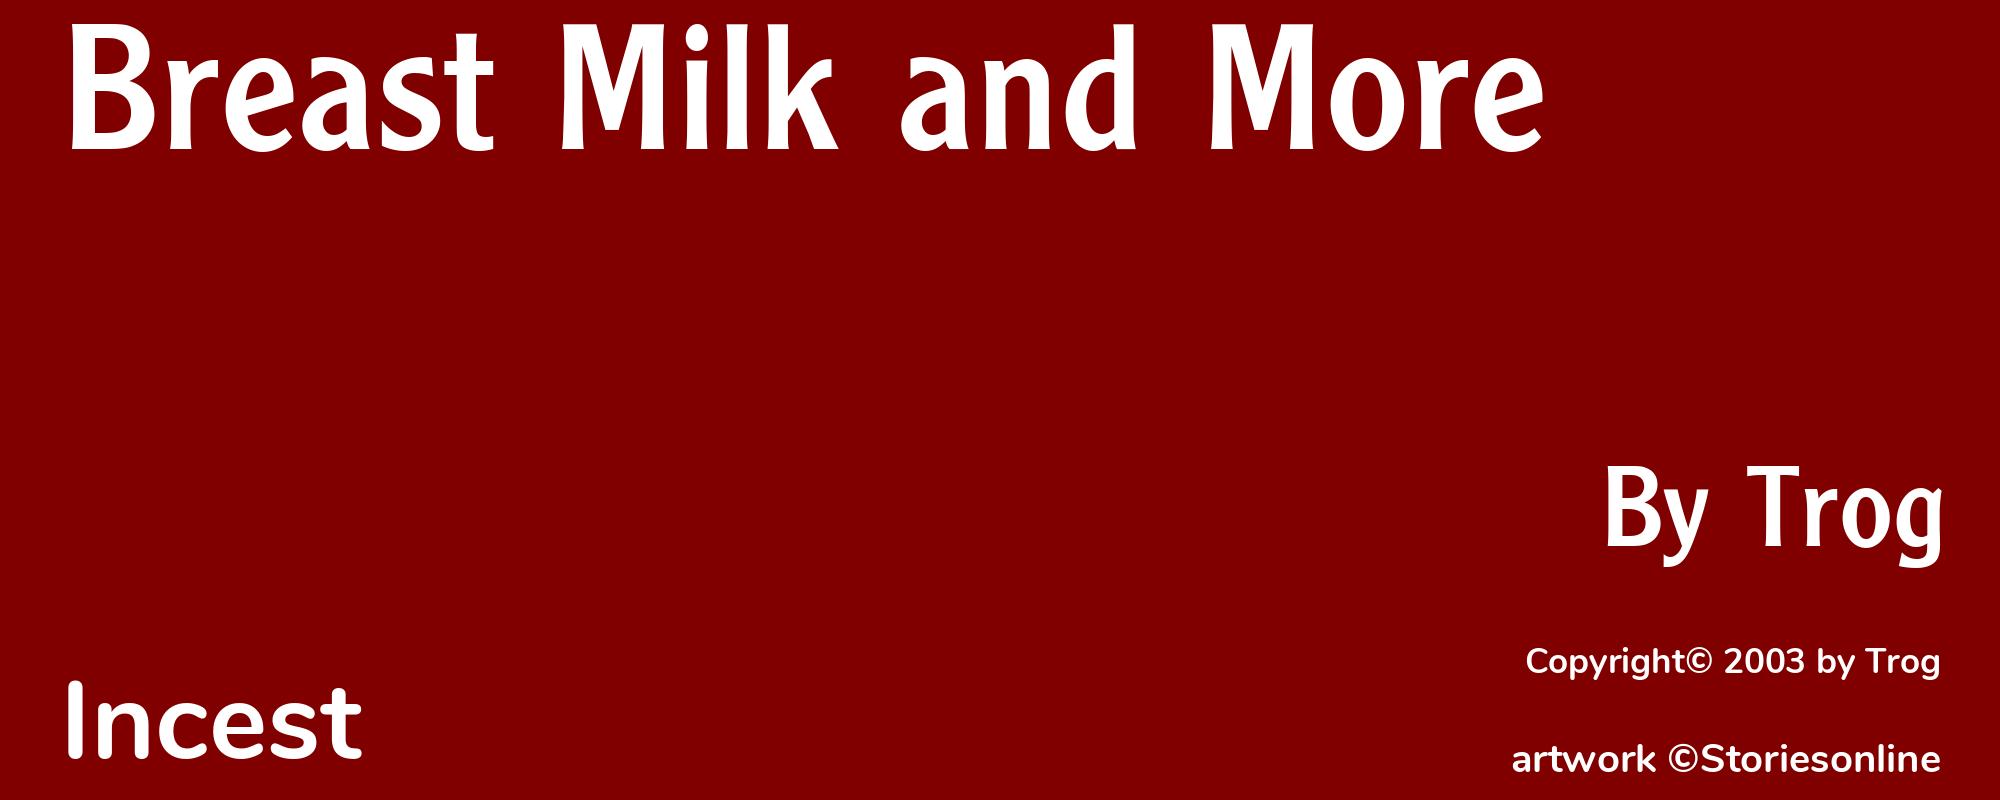 Breast Milk and More - Cover